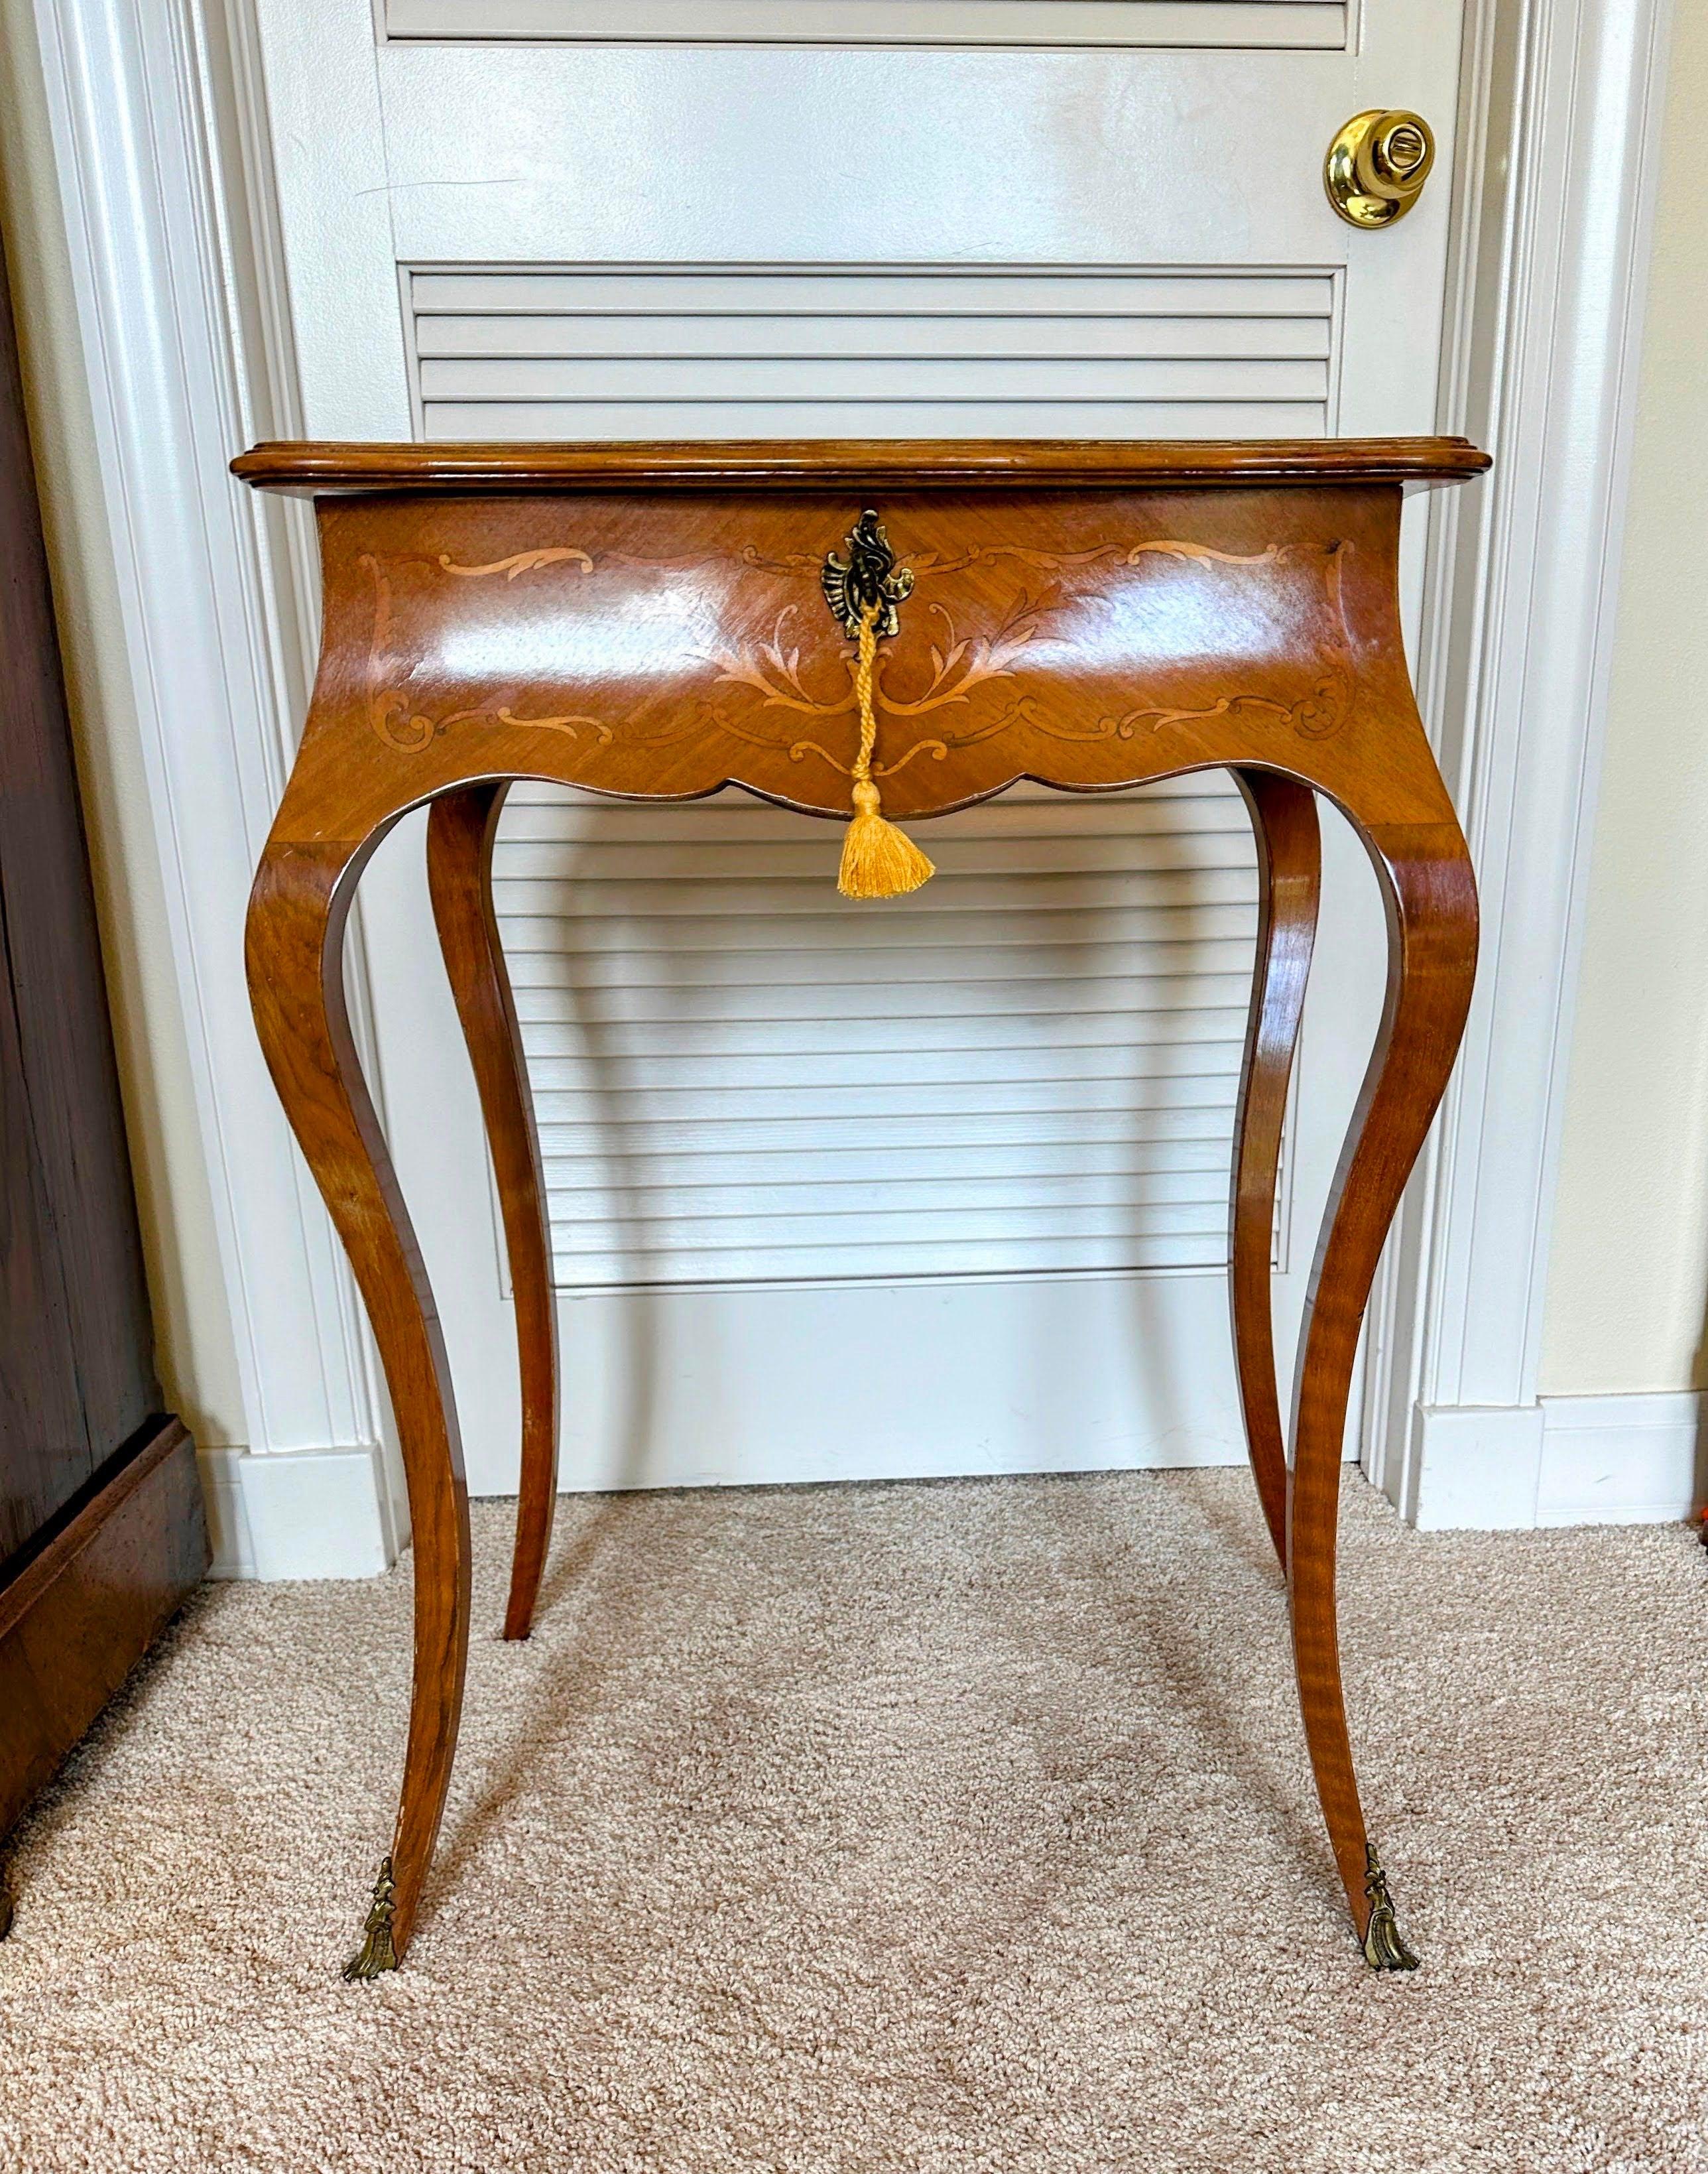 Antique French Louis XV - Napoleon III Travailleuse Sewing Work Vanity Table. This table features marquetry in lemon wood. The ornate top flips up to display a rectangular mirror with compartmental storage. The table sits on cabriole legs, bronze